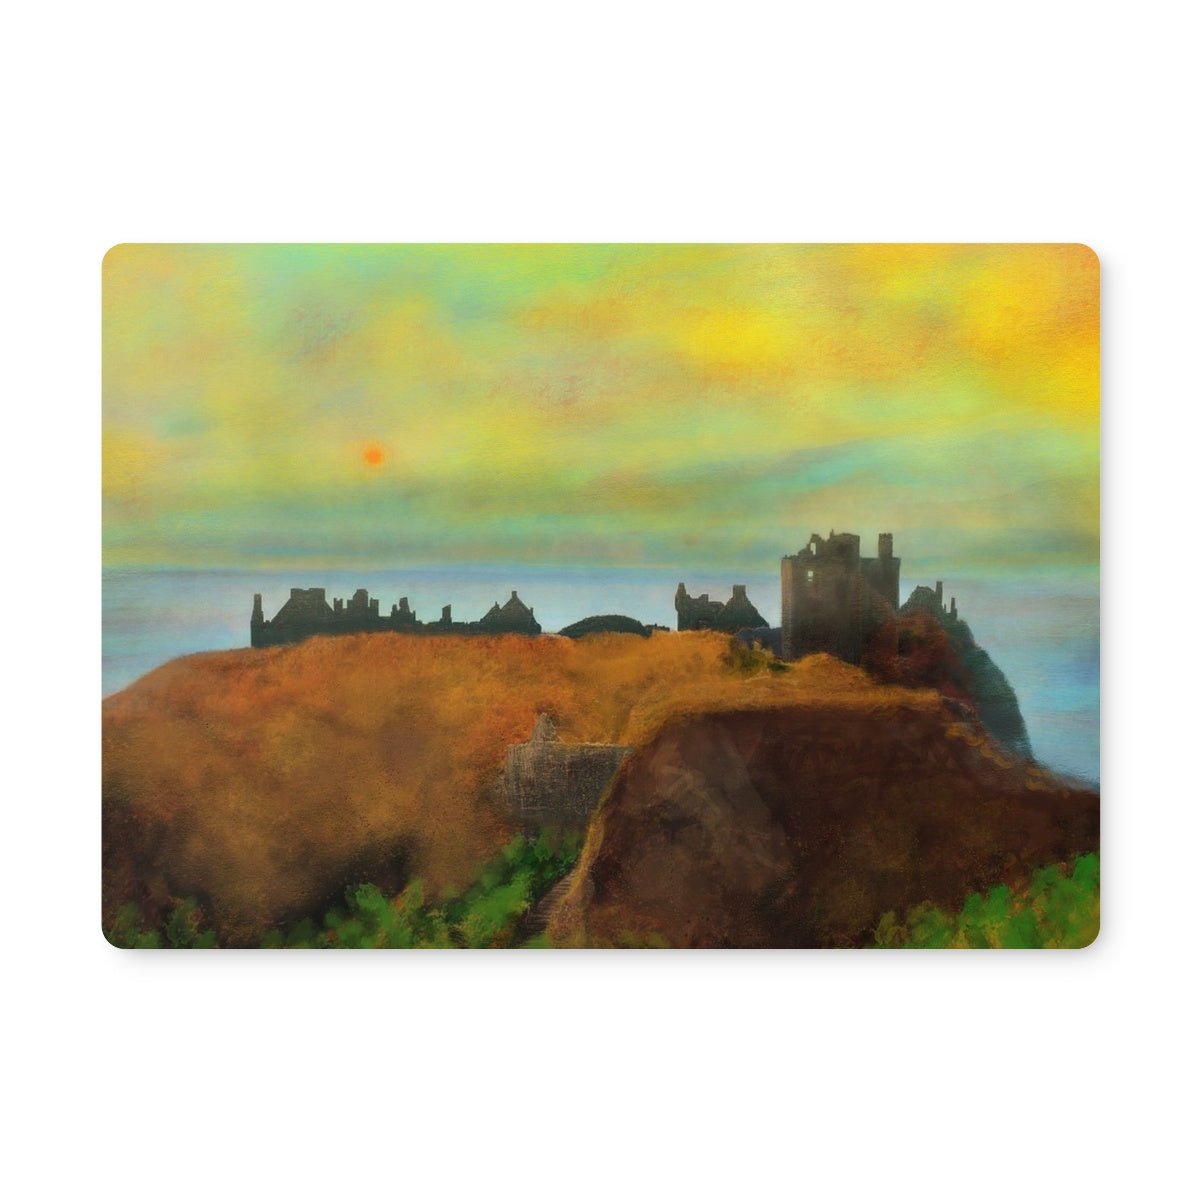 Dunnottar Castle Art Gifts Placemat-Placemats-Historic & Iconic Scotland Art Gallery-Single Placemat-Paintings, Prints, Homeware, Art Gifts From Scotland By Scottish Artist Kevin Hunter